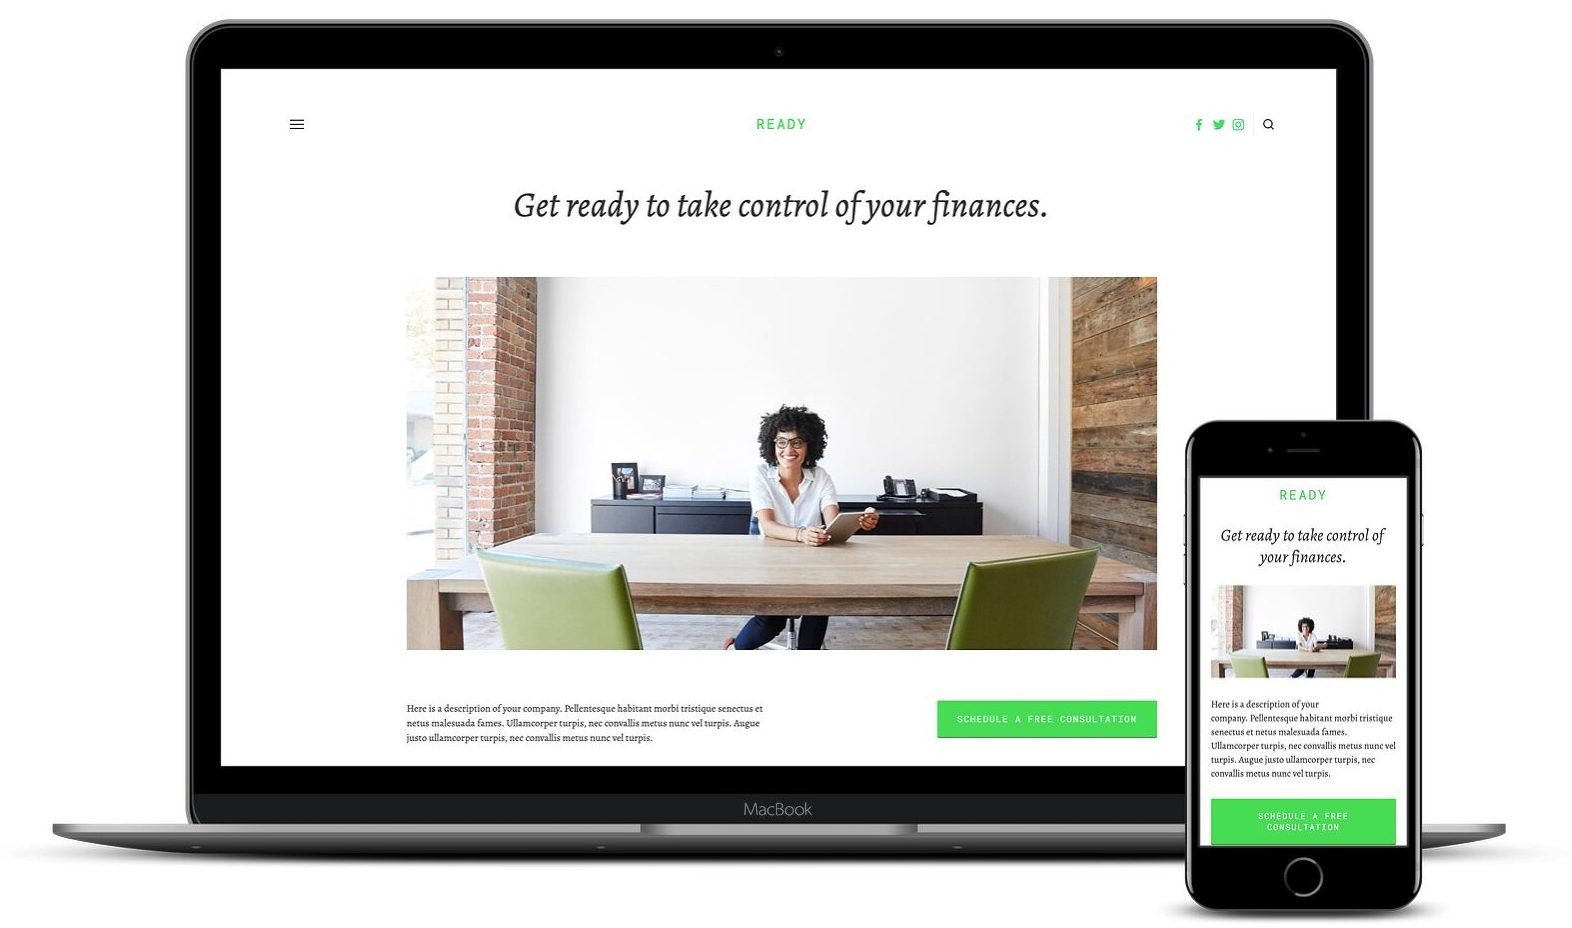 Ready is among the best Squarespace templates for professionals